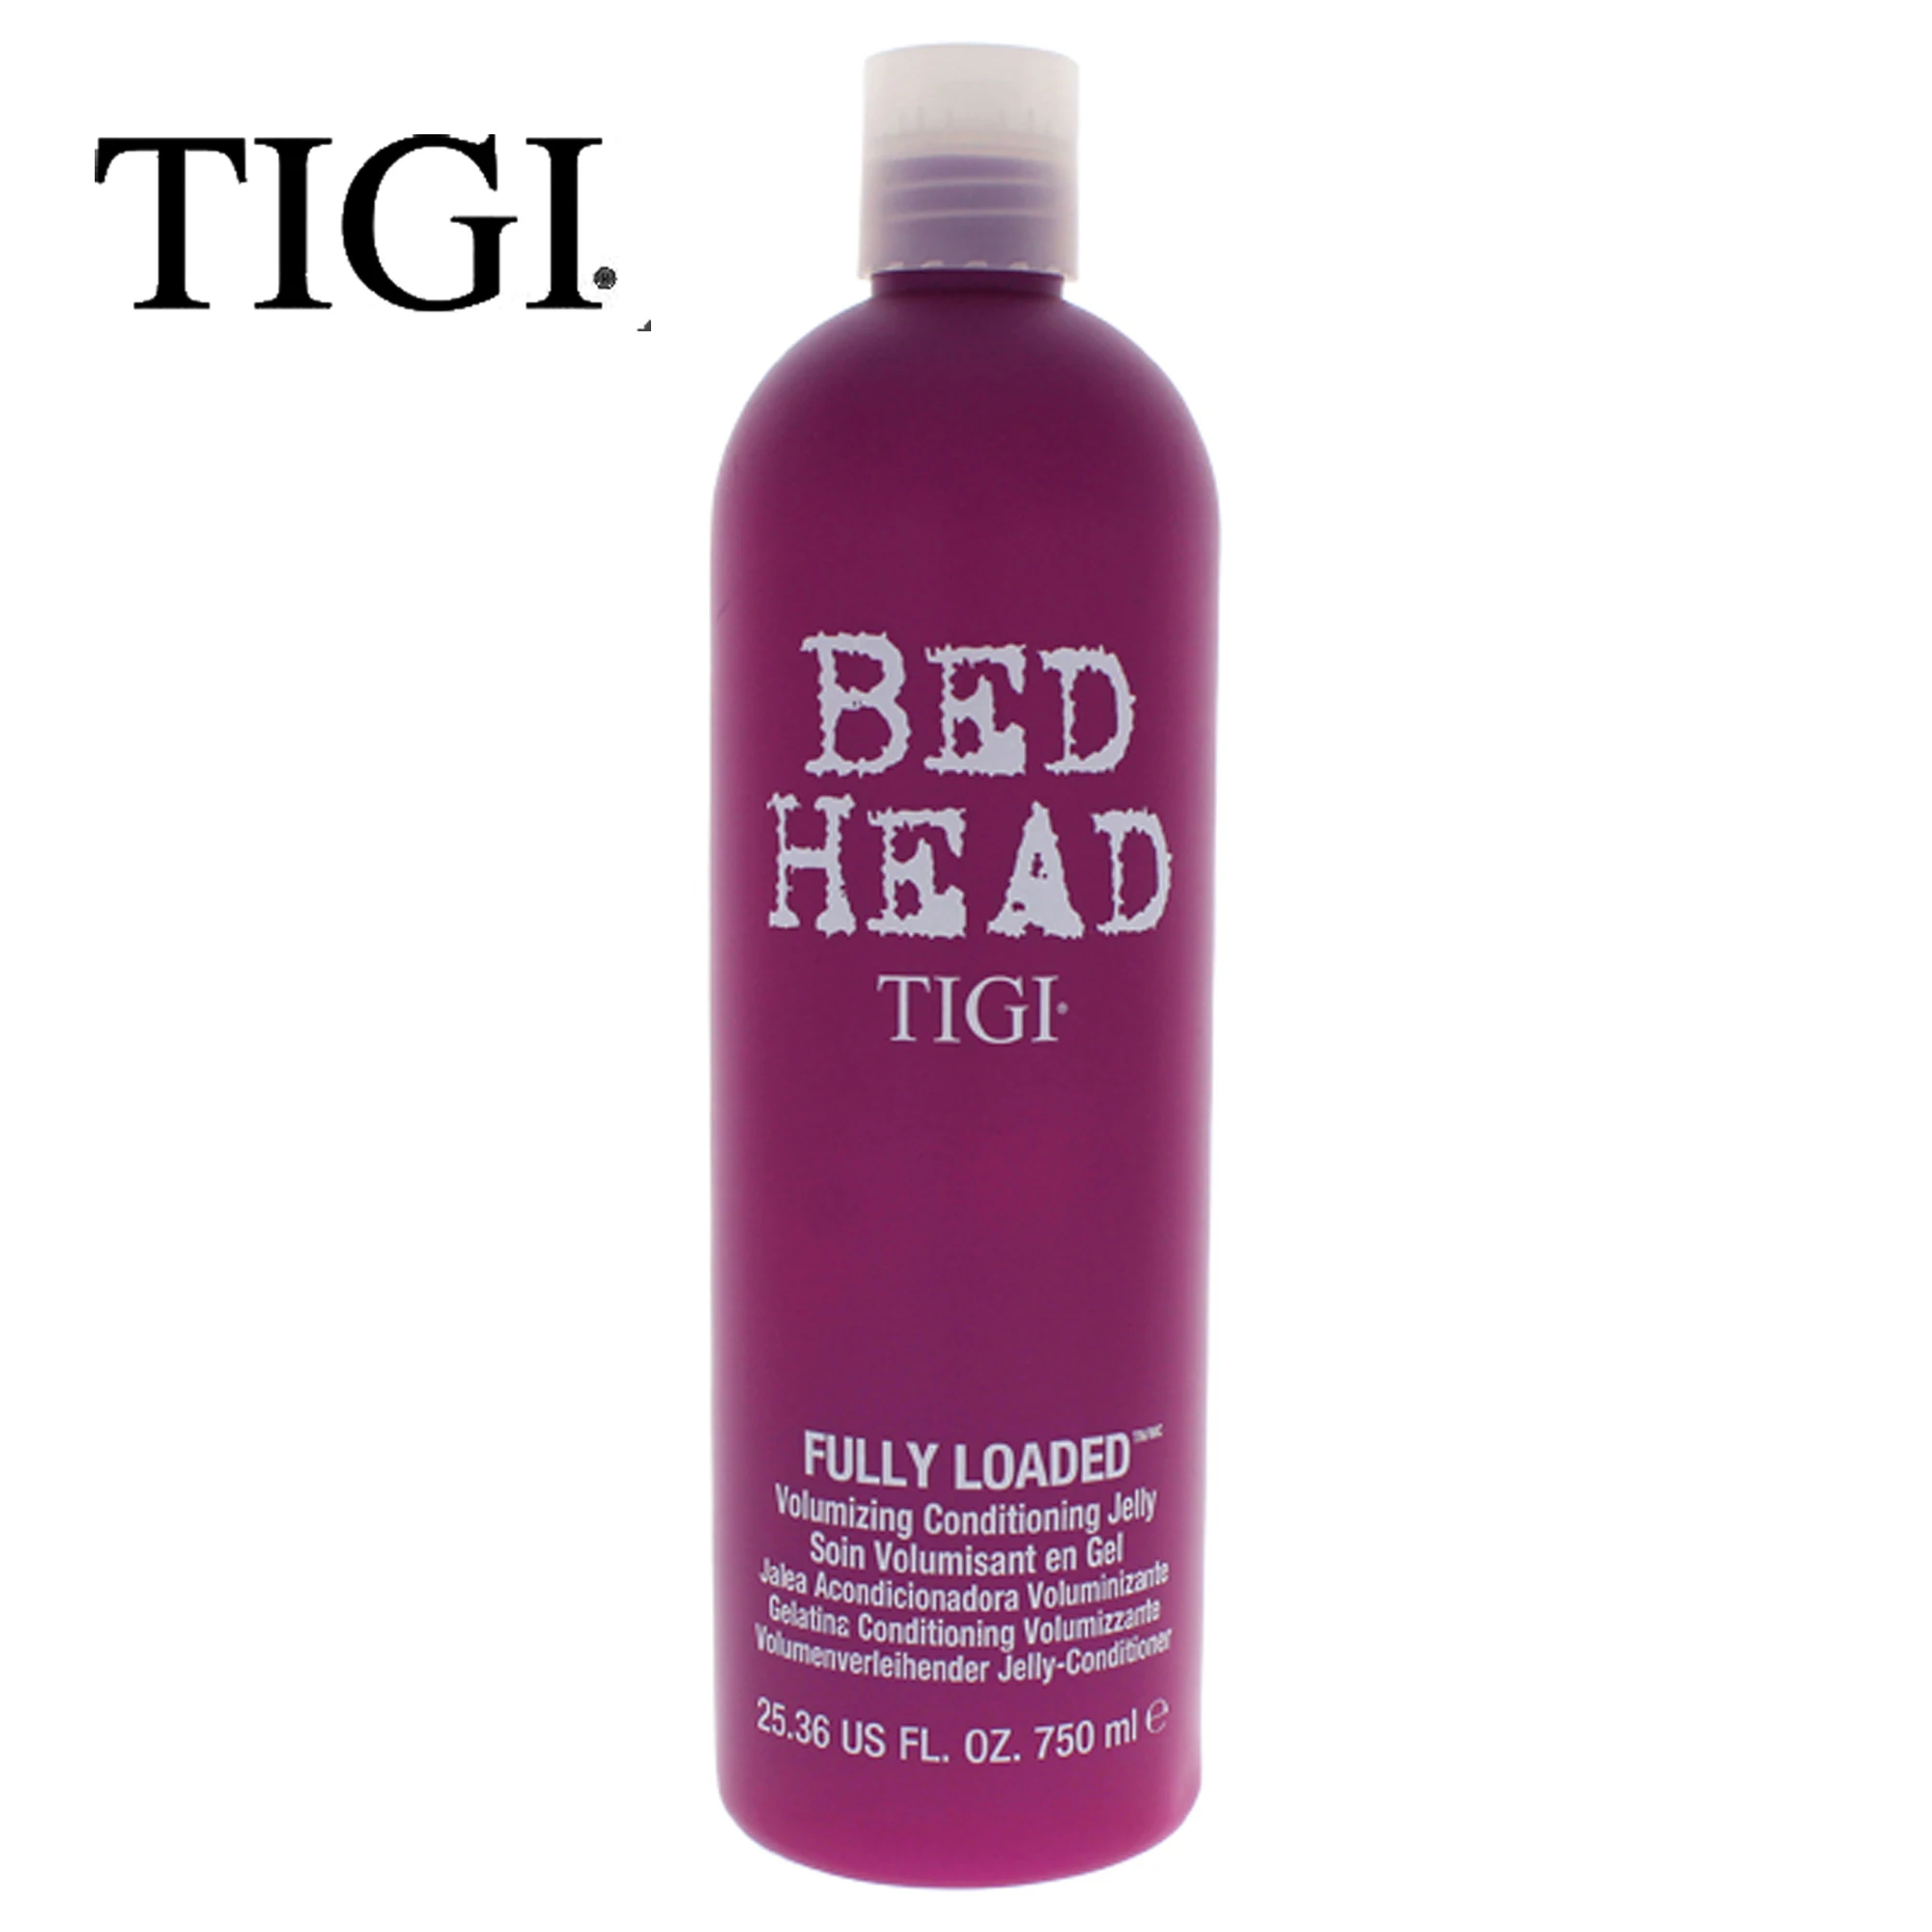 

TIGI Conditioner Bed Head Fully Loaded Volumizing Conditioning Jelly for Unisex - 25.36 oz